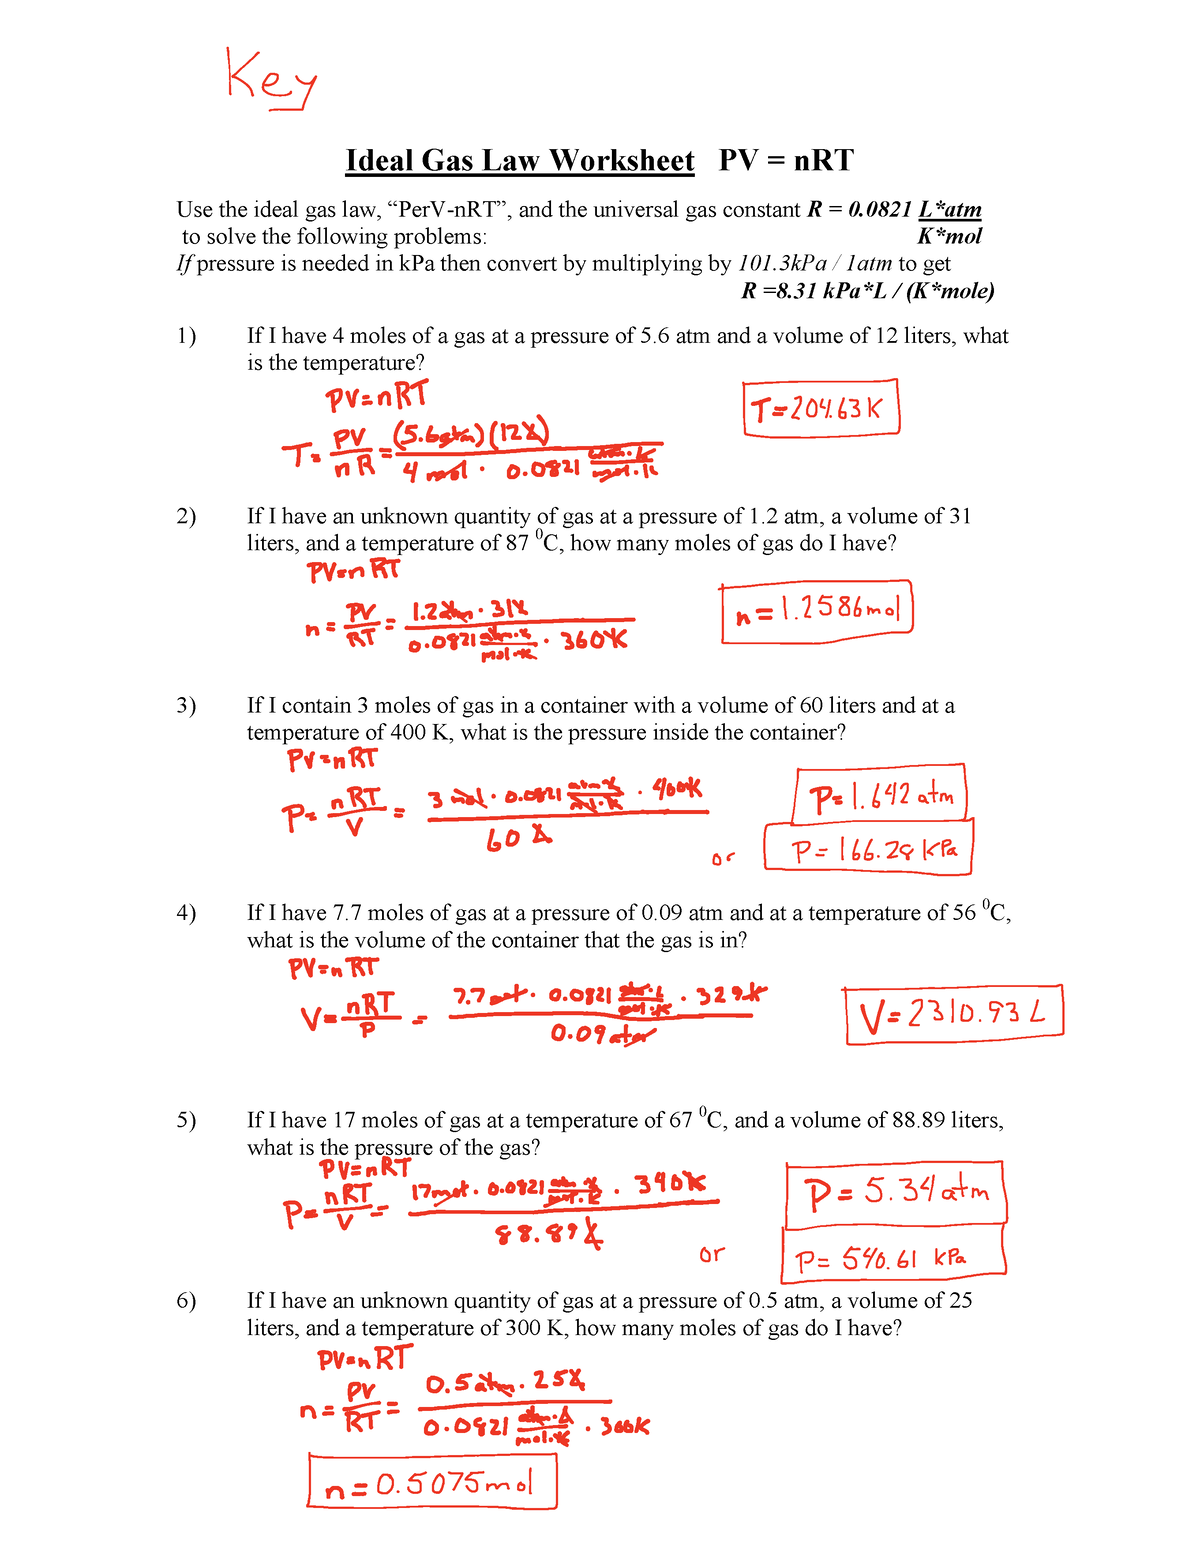 ideal-gas-law-worksheet-2-answer-ideal-gas-law-worksheet-pv-nrt-use